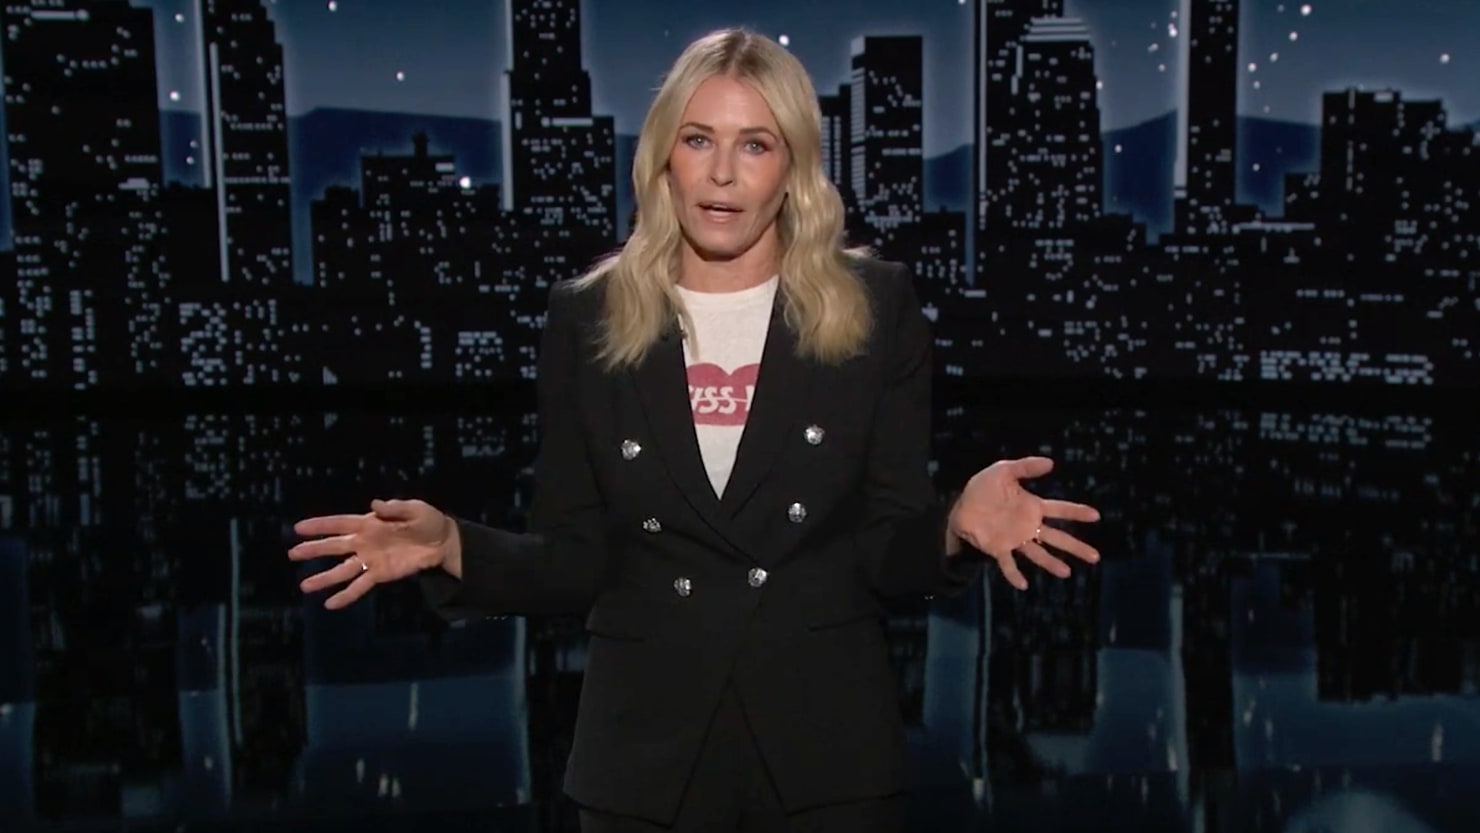 Chelsea Handler ends Kimmel Run by going after Joe Rogan and Clarence Thomas